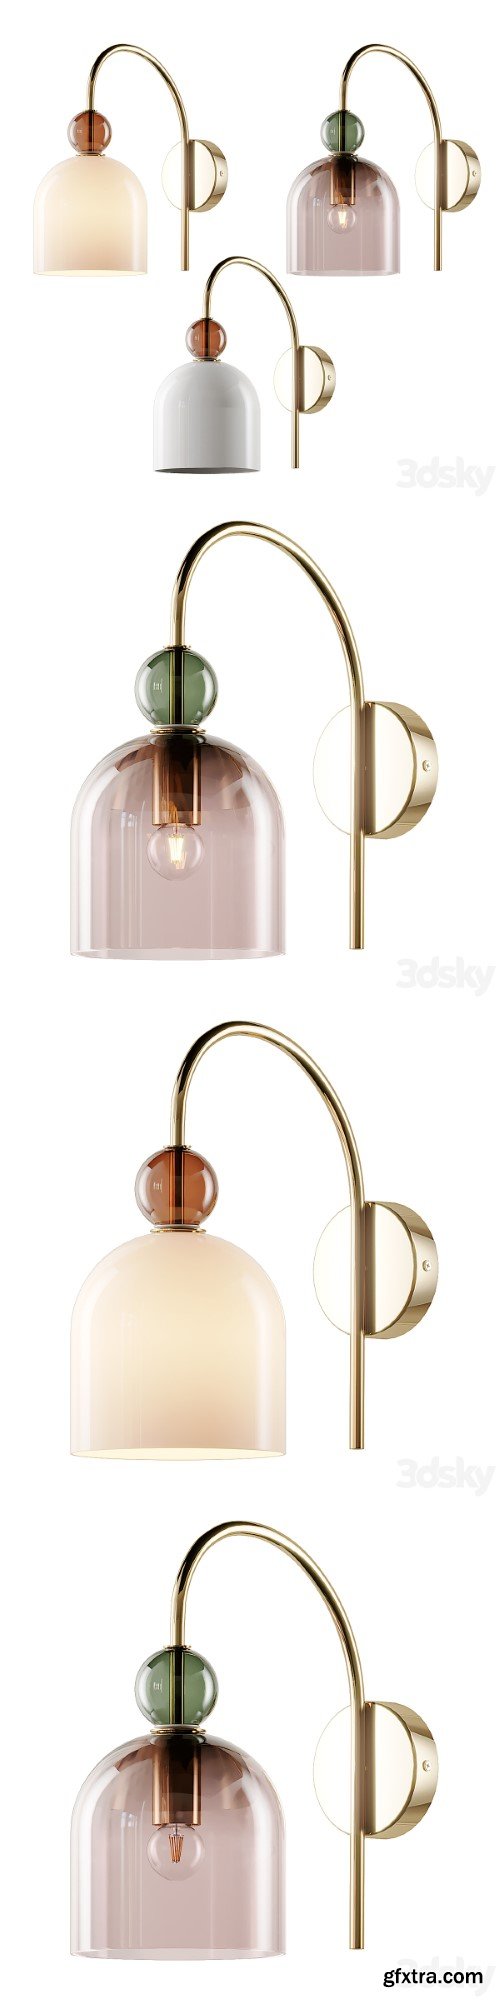 Whitney wall sconce Designed by MADE Studio